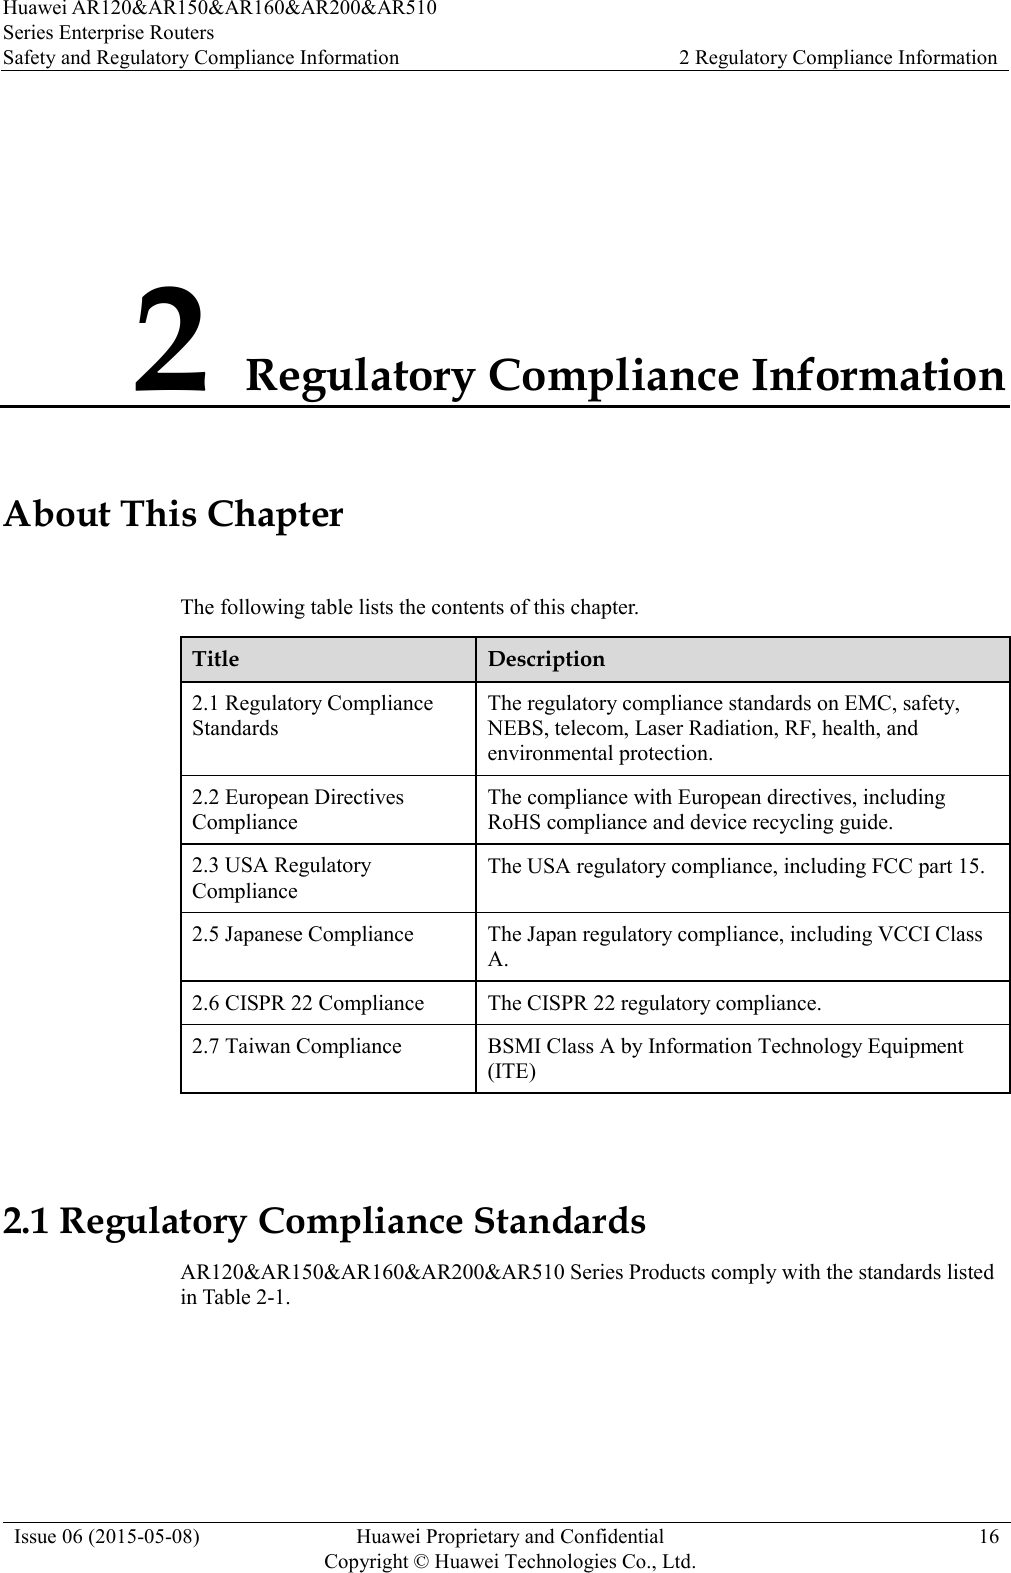 Huawei AR120&amp;AR150&amp;AR160&amp;AR200&amp;AR510 Series Enterprise Routers Safety and Regulatory Compliance Information 2 Regulatory Compliance Information  Issue 06 (2015-05-08) Huawei Proprietary and Confidential           Copyright © Huawei Technologies Co., Ltd. 16  2 Regulatory Compliance Information About This Chapter The following table lists the contents of this chapter. Title Description 2.1 Regulatory Compliance Standards The regulatory compliance standards on EMC, safety, NEBS, telecom, Laser Radiation, RF, health, and environmental protection. 2.2 European Directives Compliance The compliance with European directives, including RoHS compliance and device recycling guide. 2.3 USA Regulatory Compliance The USA regulatory compliance, including FCC part 15. 2.5 Japanese Compliance The Japan regulatory compliance, including VCCI Class A. 2.6 CISPR 22 Compliance The CISPR 22 regulatory compliance. 2.7 Taiwan Compliance BSMI Class A by Information Technology Equipment (ITE)  2.1 Regulatory Compliance Standards AR120&amp;AR150&amp;AR160&amp;AR200&amp;AR510 Series Products comply with the standards listed in Table 2-1. 